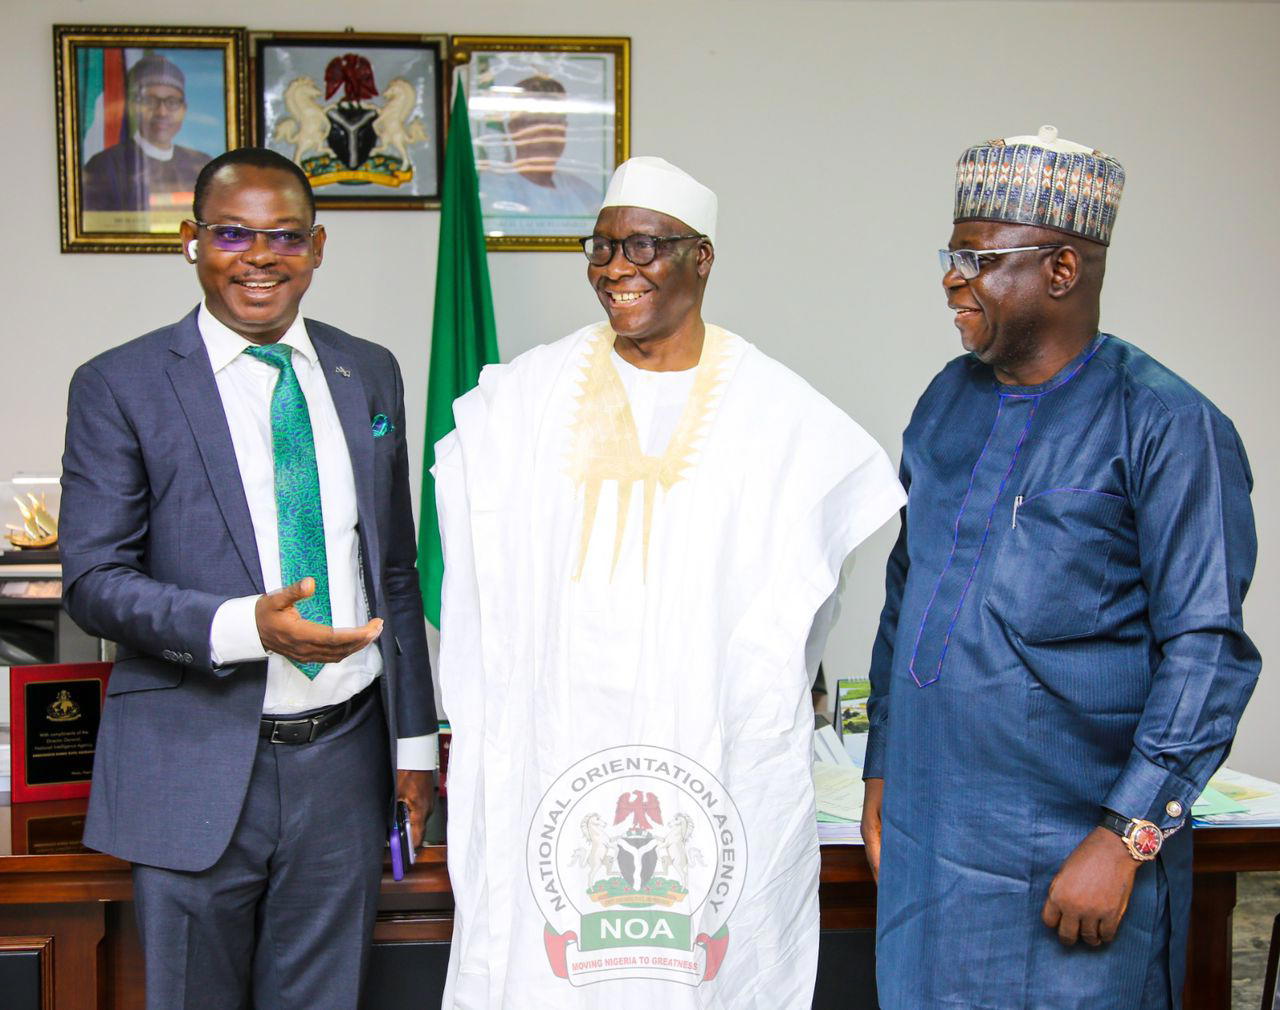 NOA to partner with NGO in fight against fake news - Vanguard News